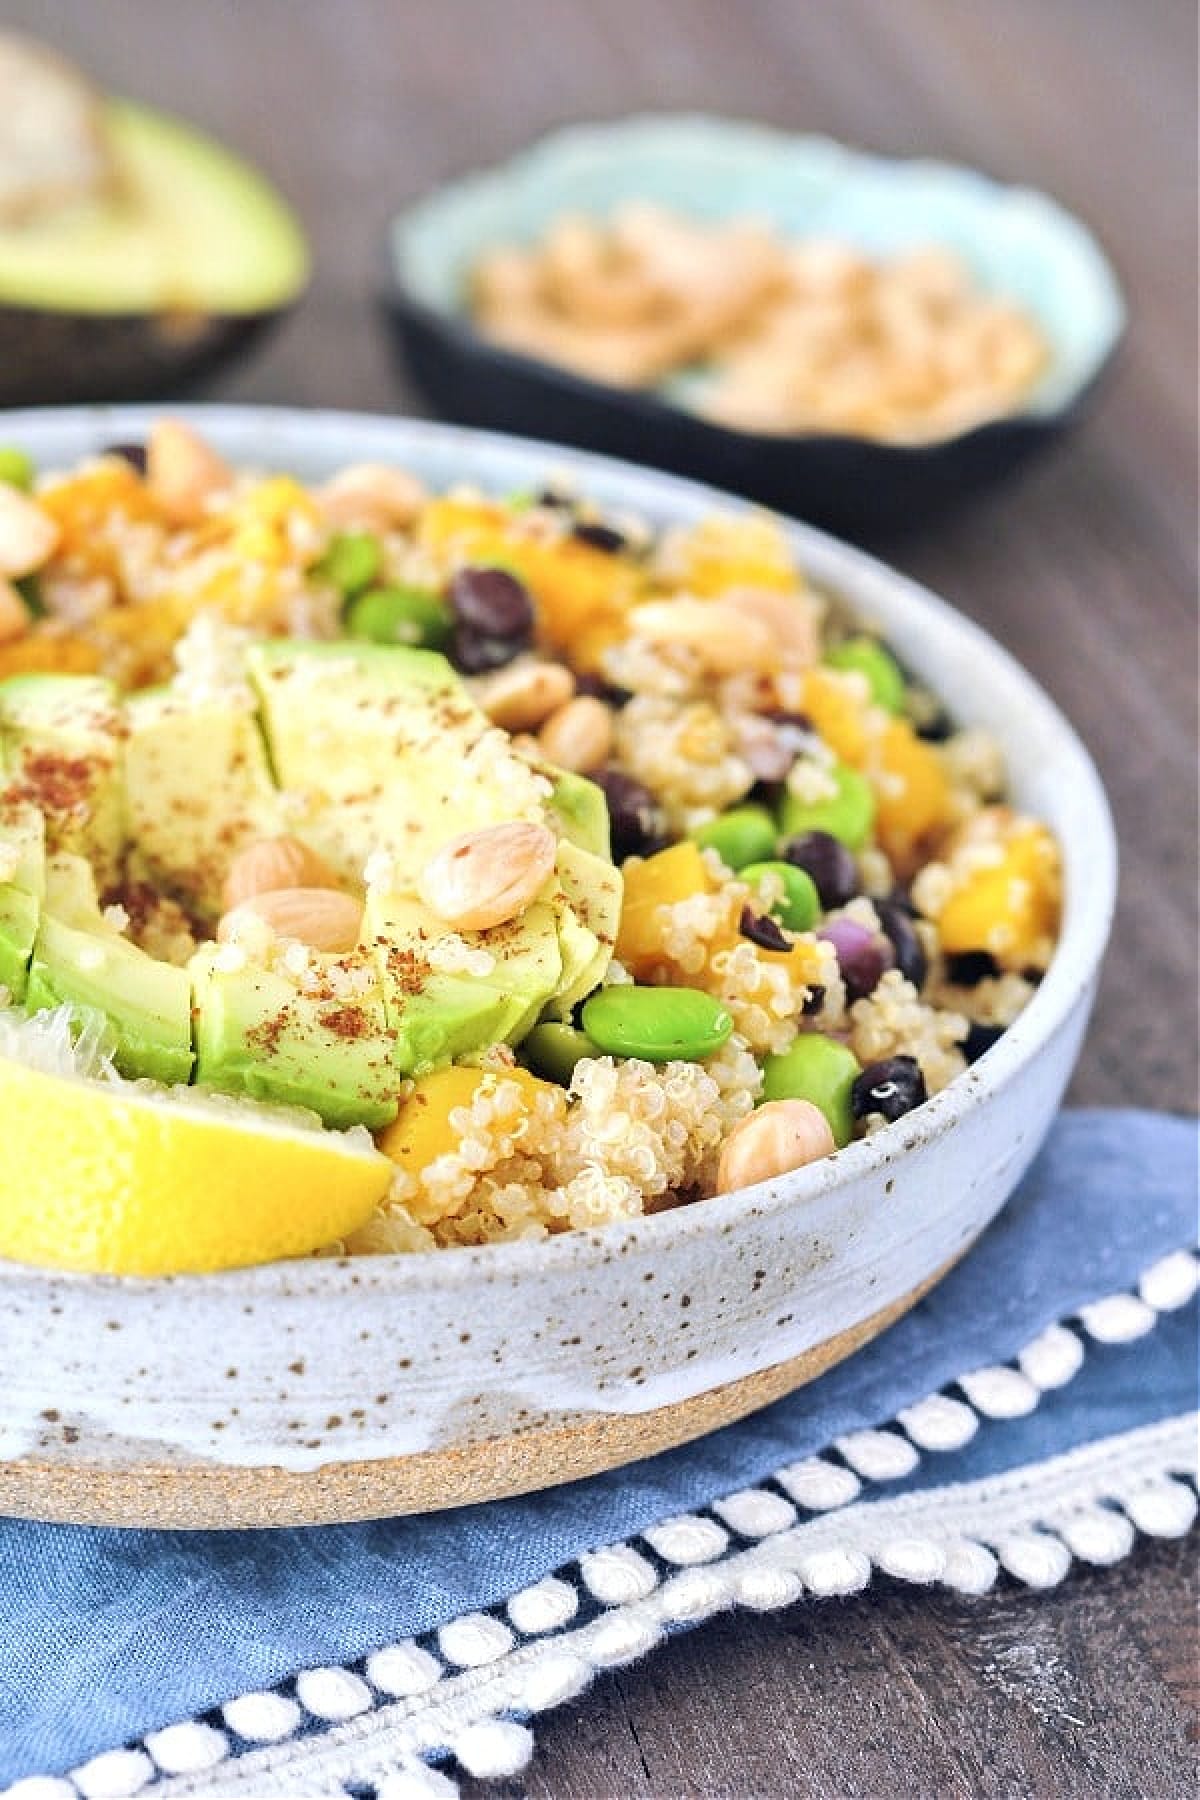 Mango edamame quinoa salad with cubed avocado on top. Image shows three quarters of the bowl, blurred background has a small bowl of almonds and another half avocado.